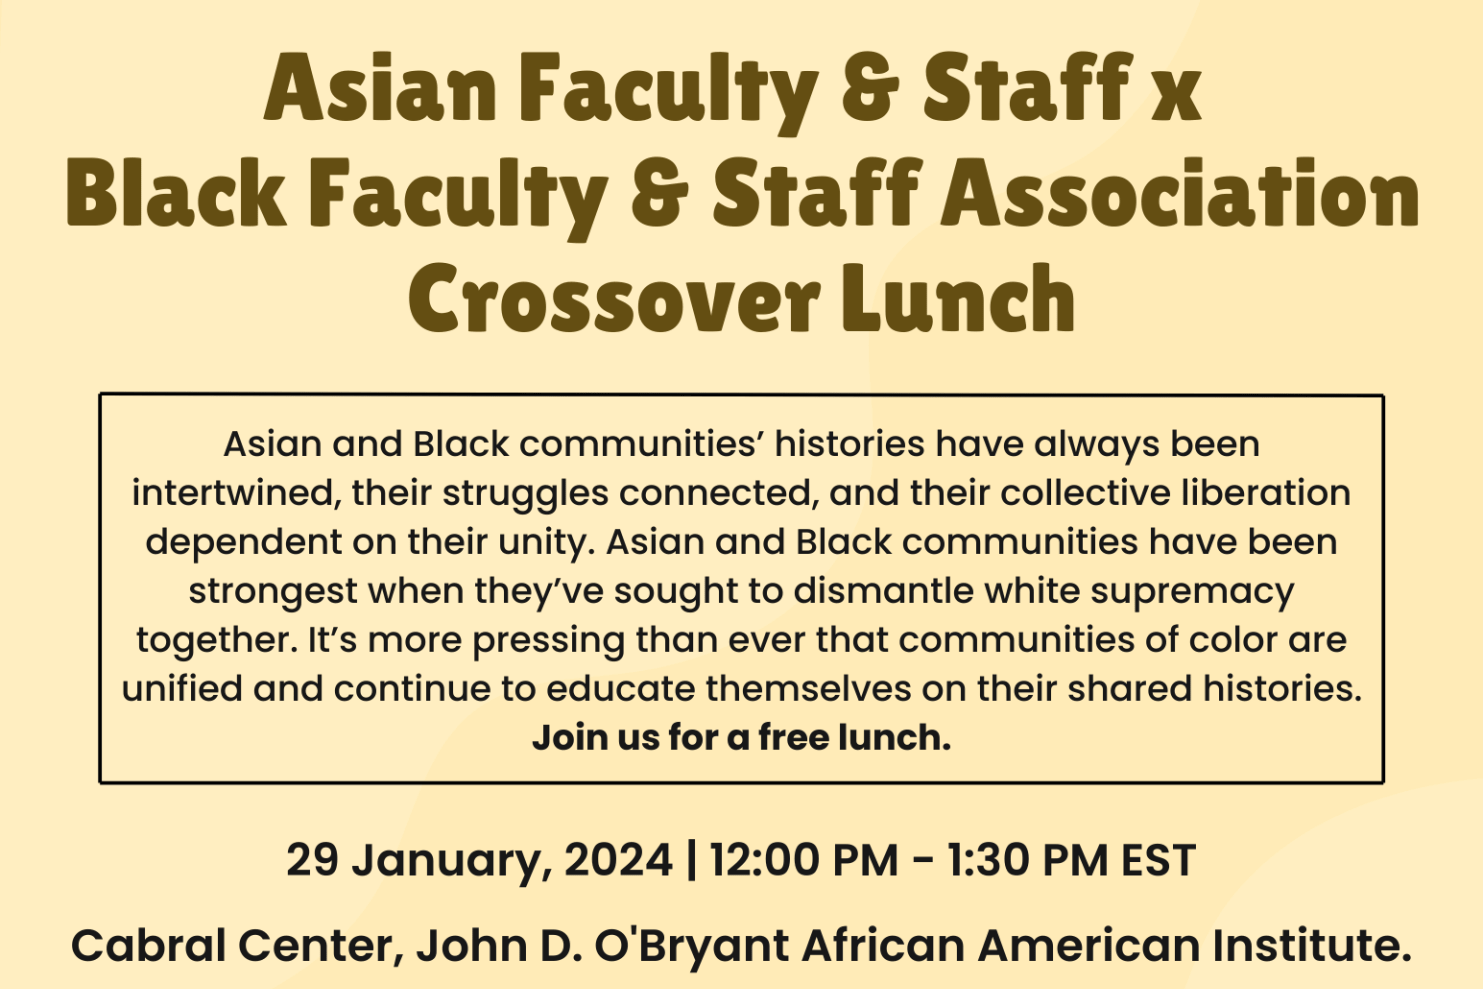 Asian Faculty Staff x Black Faculty Staff Association Crossover Lunch Flyer